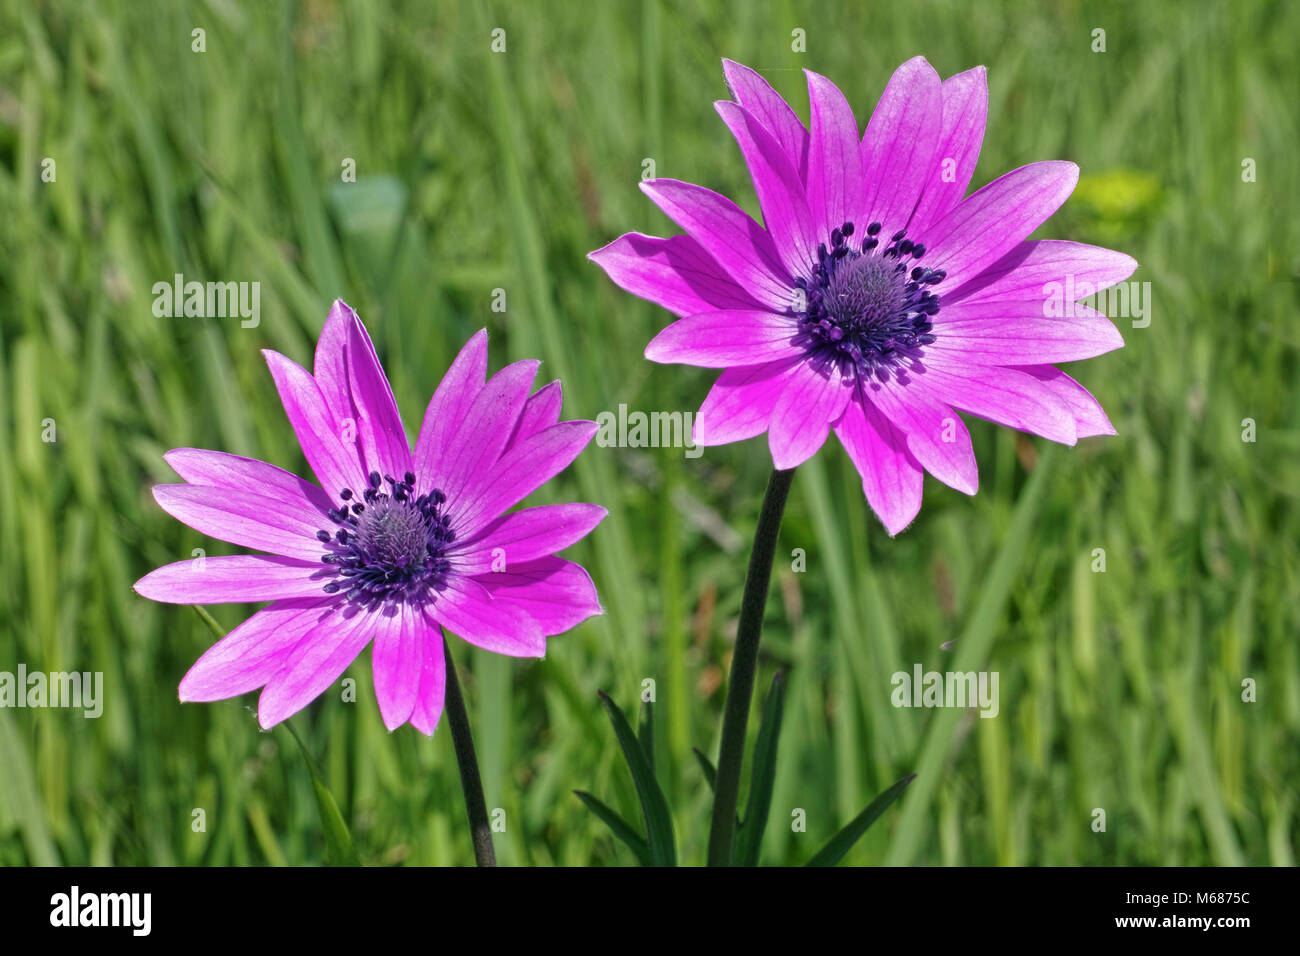 two flowers of broad-leaved anemone Stock Photo